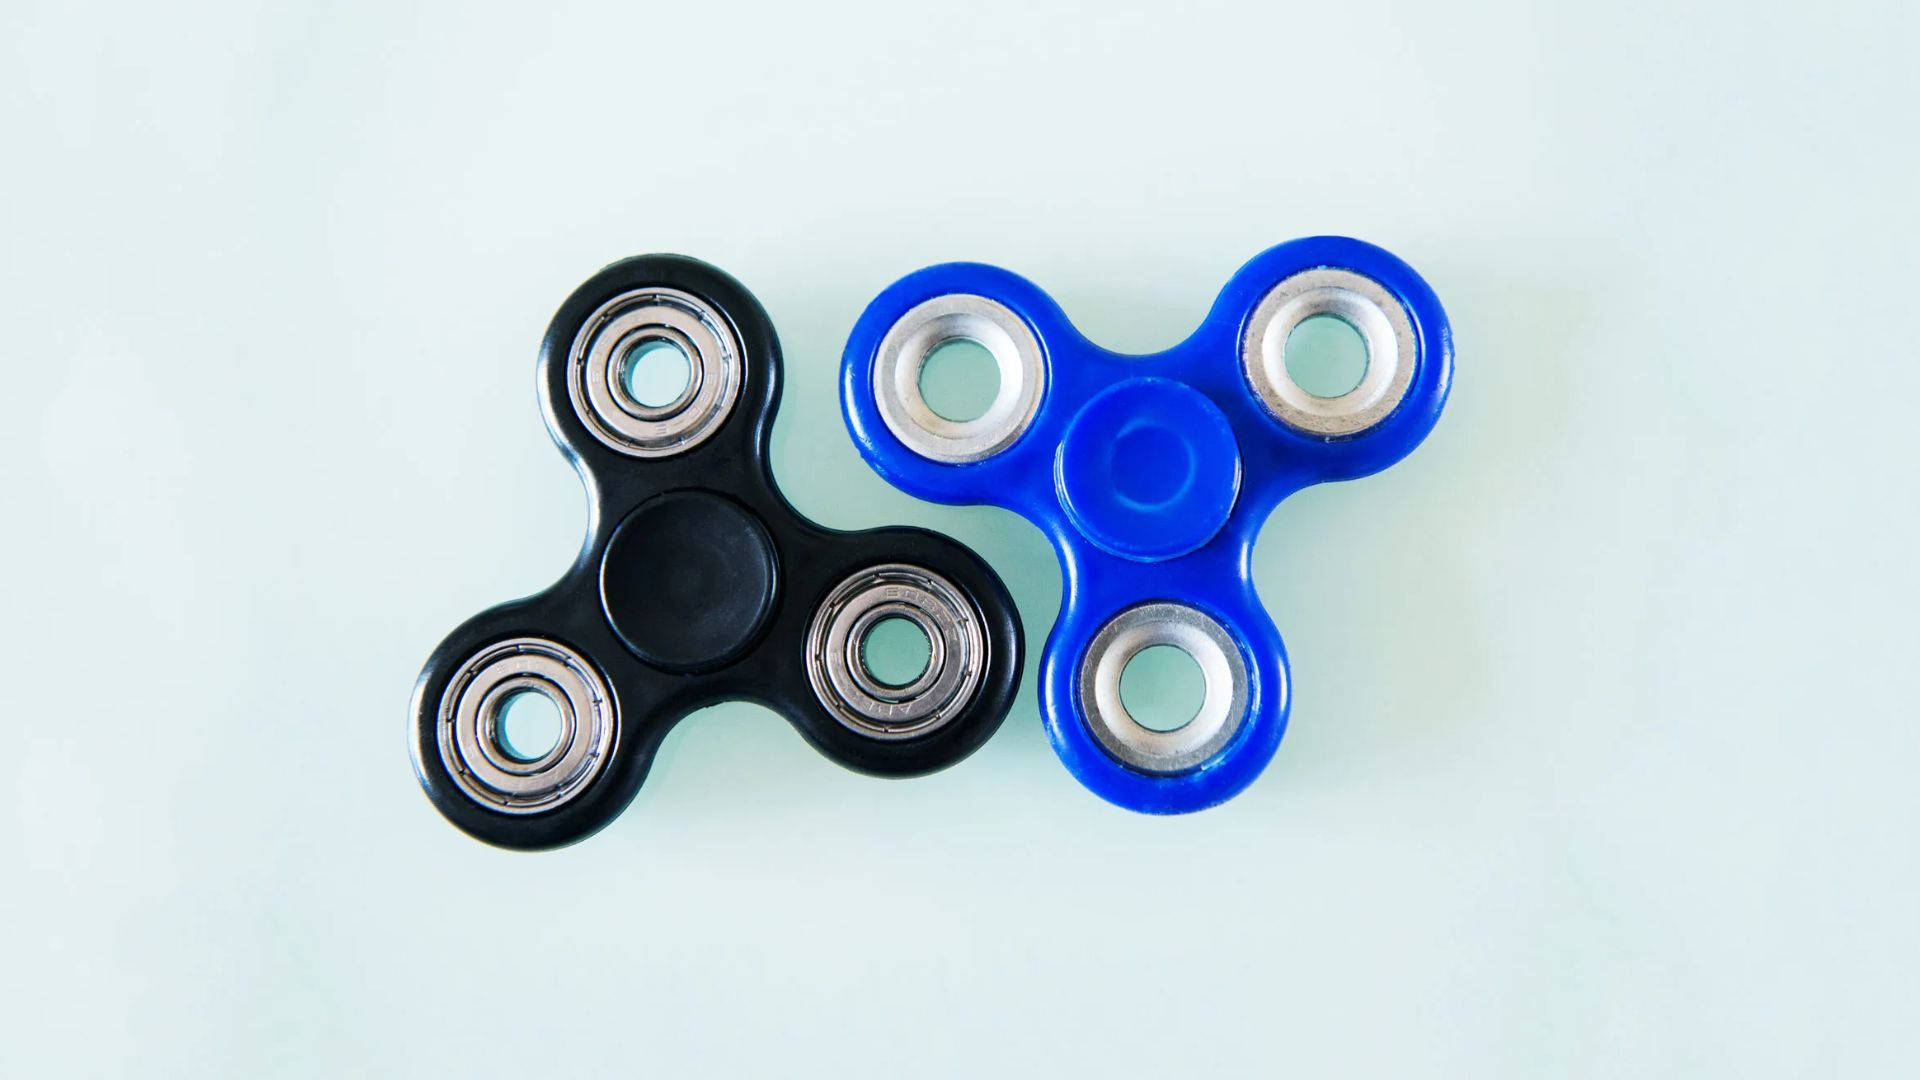 Soothing Design: Black And Blue Fidget Toys